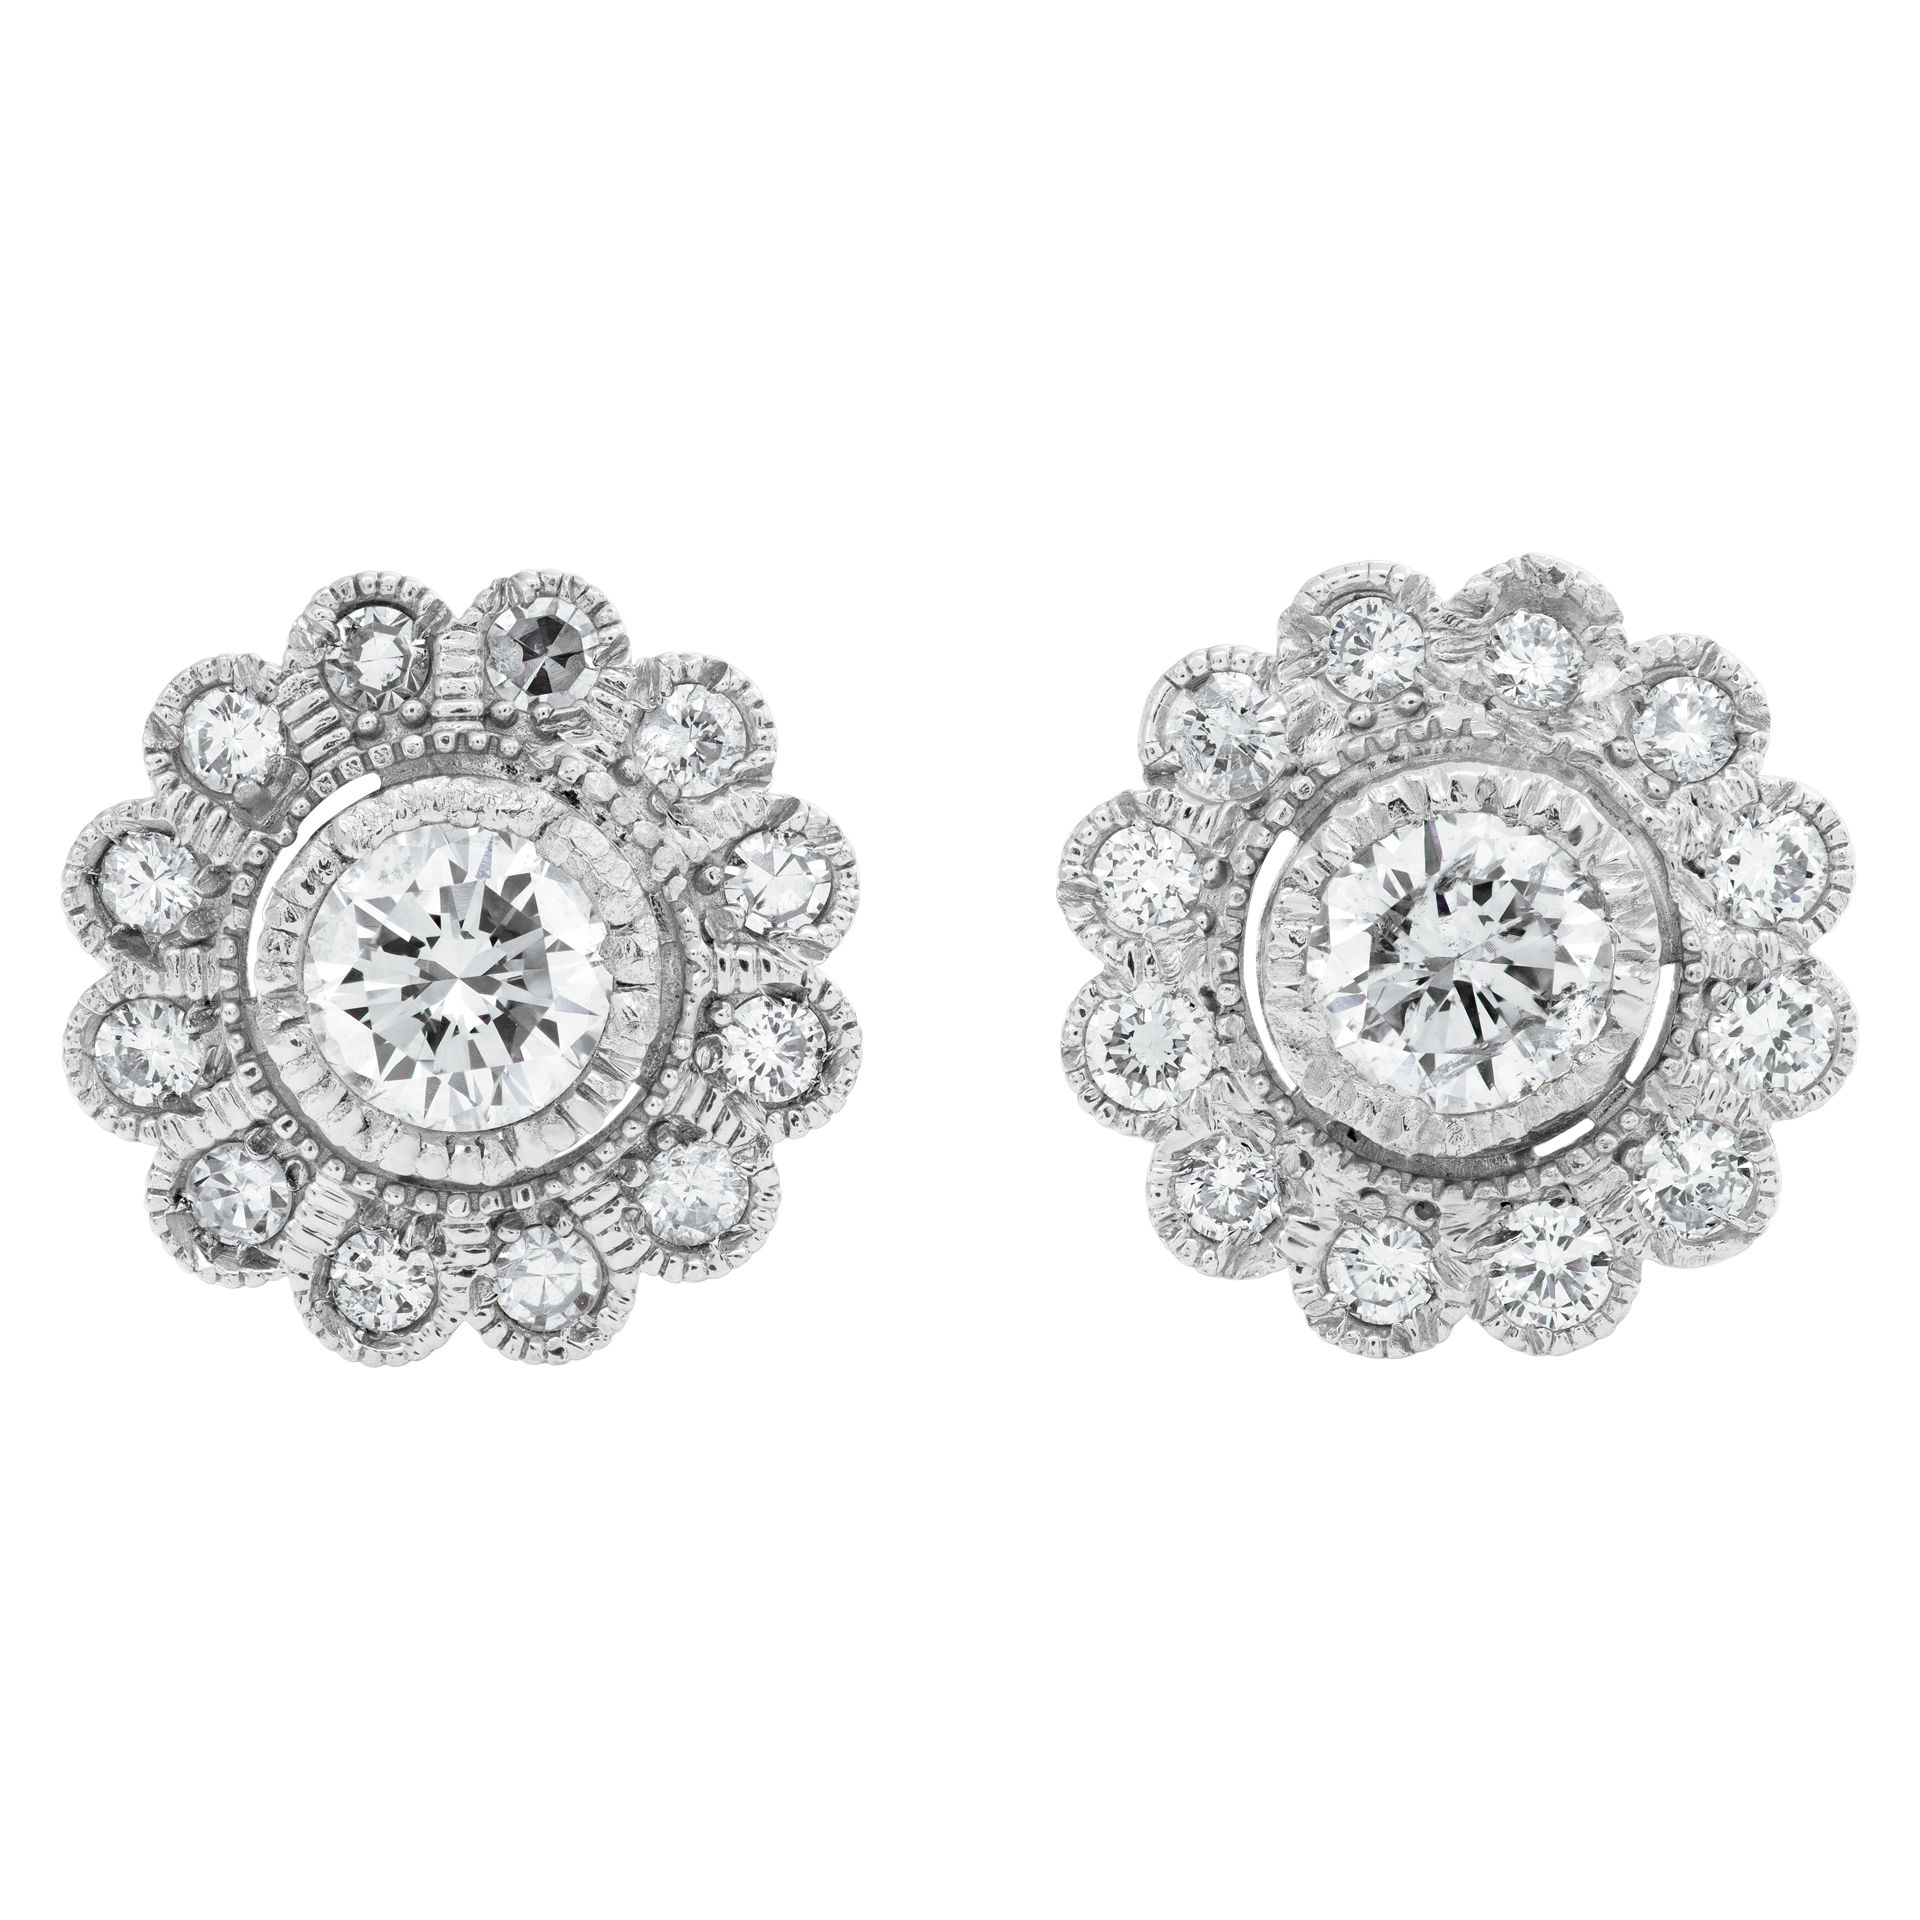 Flower Shaped Diamond Stud earrings full cut brilliant diamond total approx weight= 0.90 cts set in 18k white gold 10mm diameter